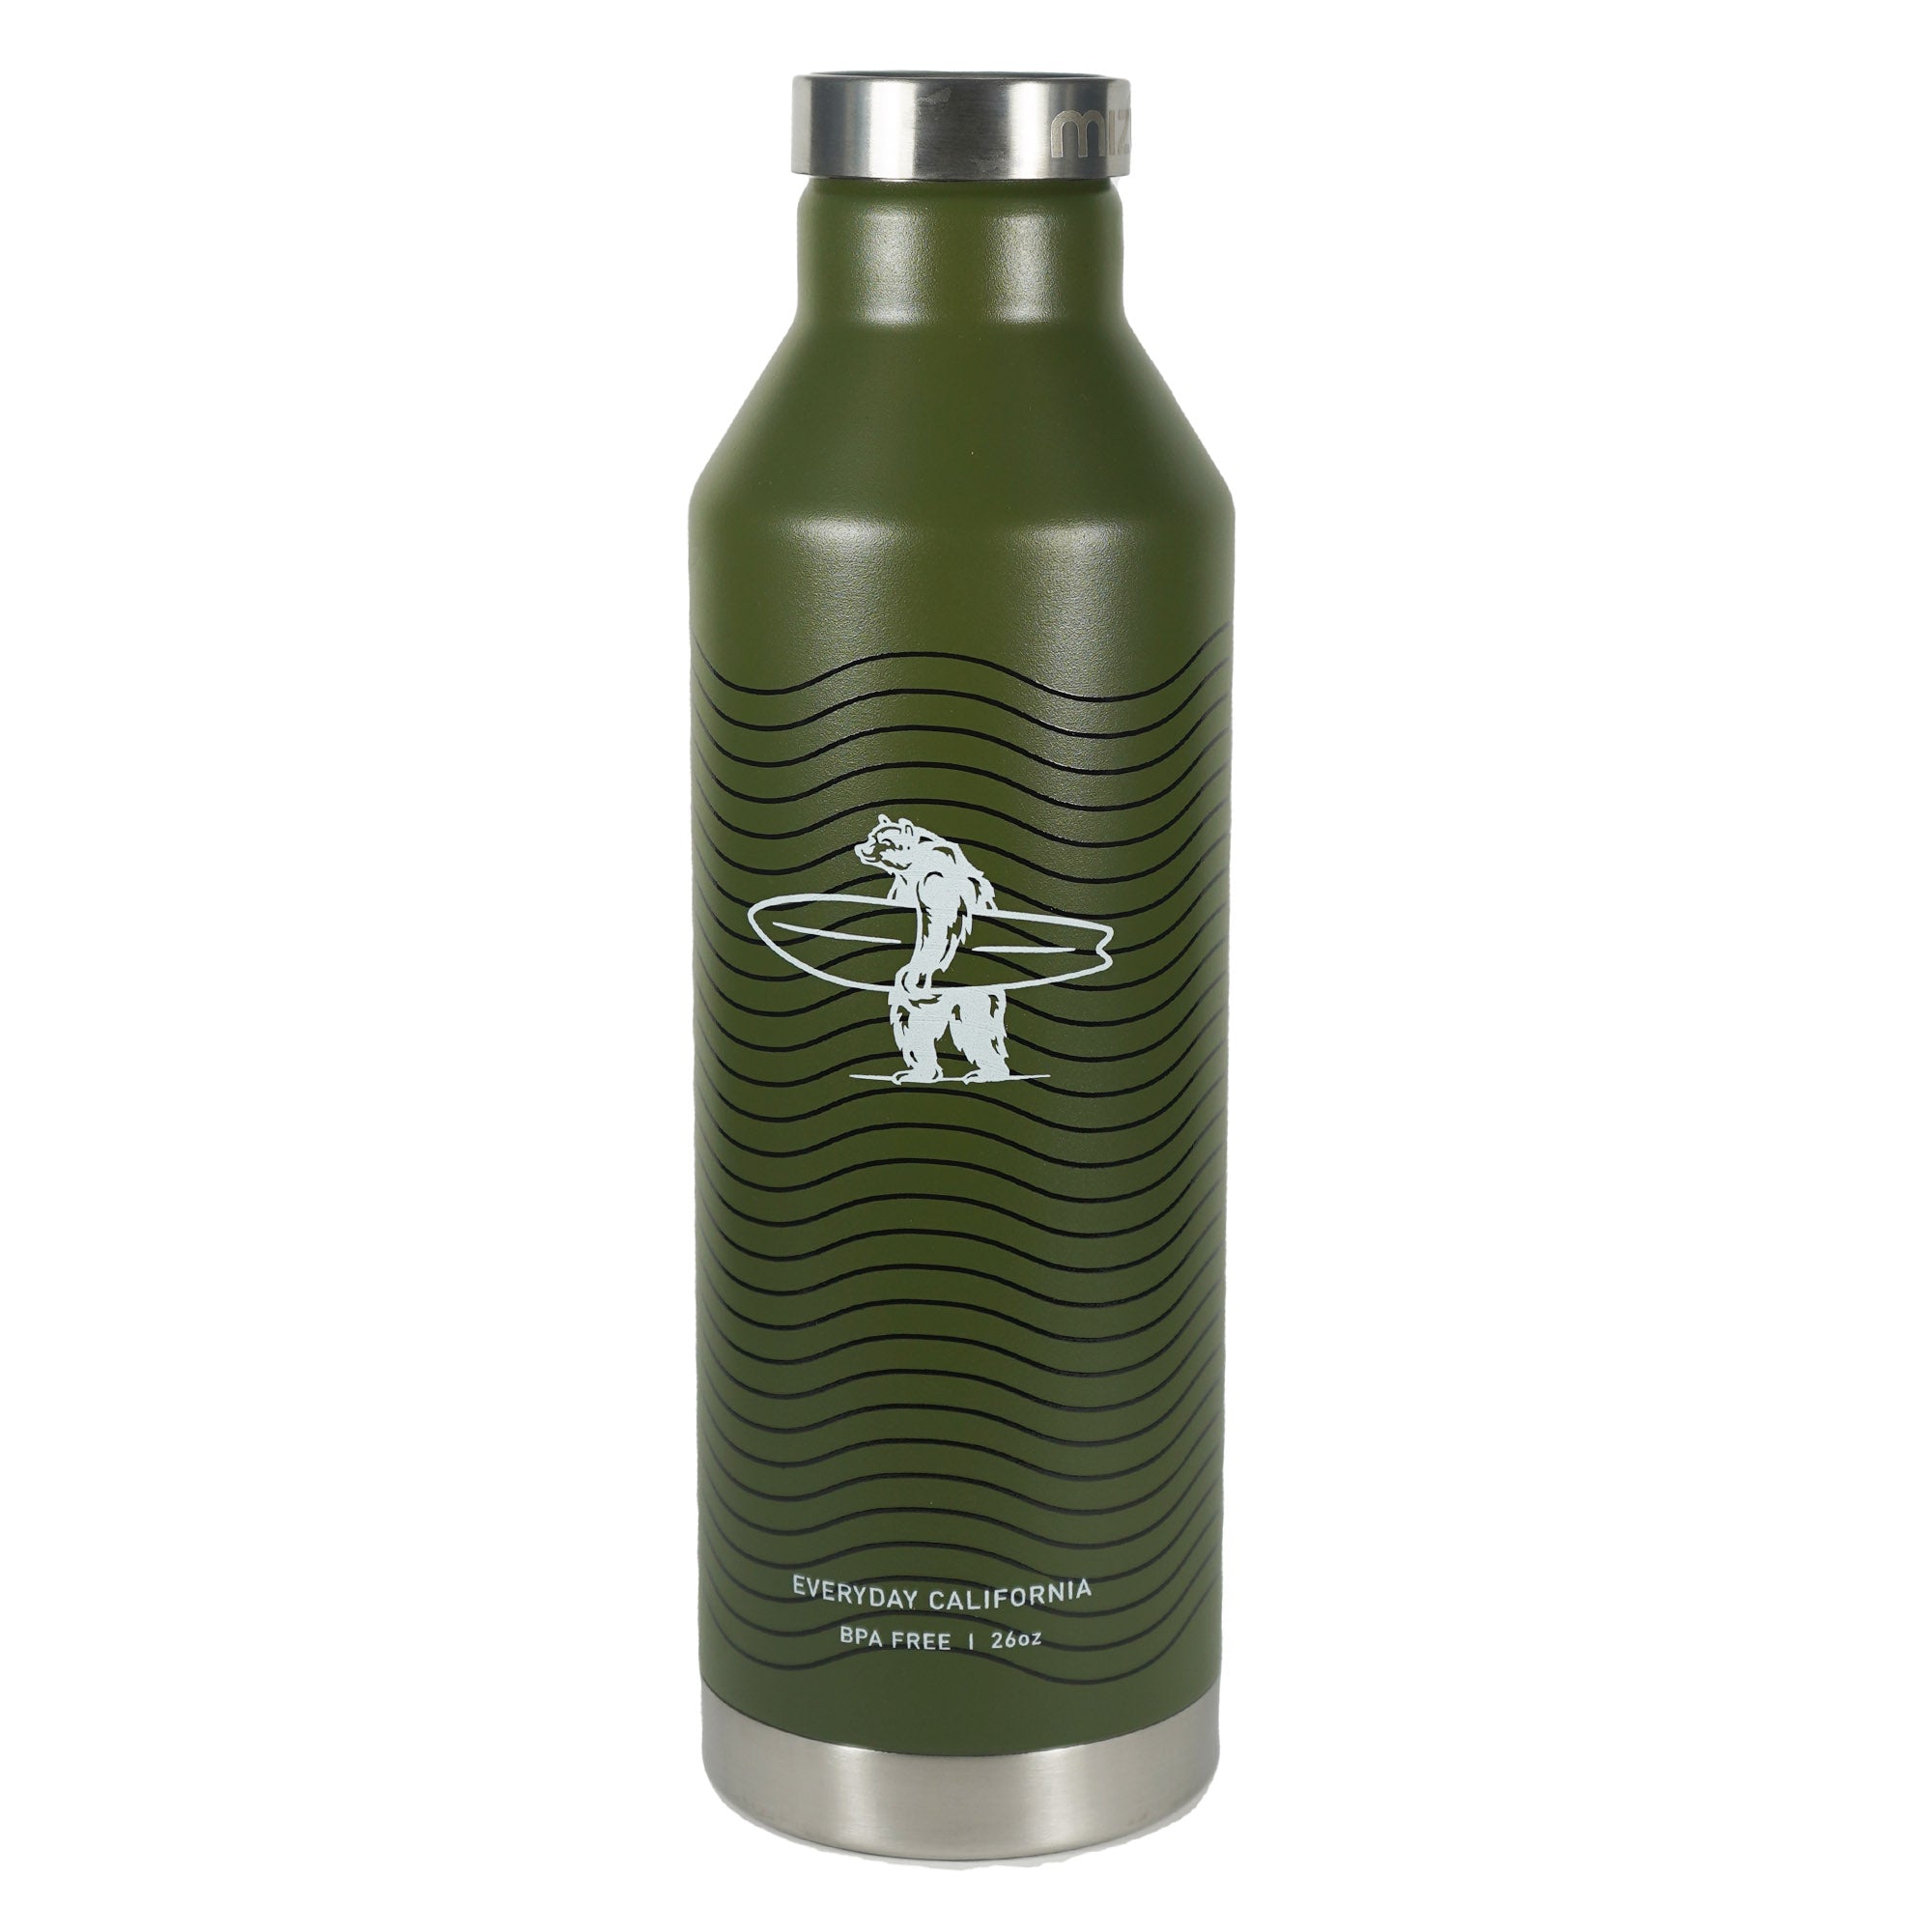 Everyday California military green Brutus insulated waterbottle